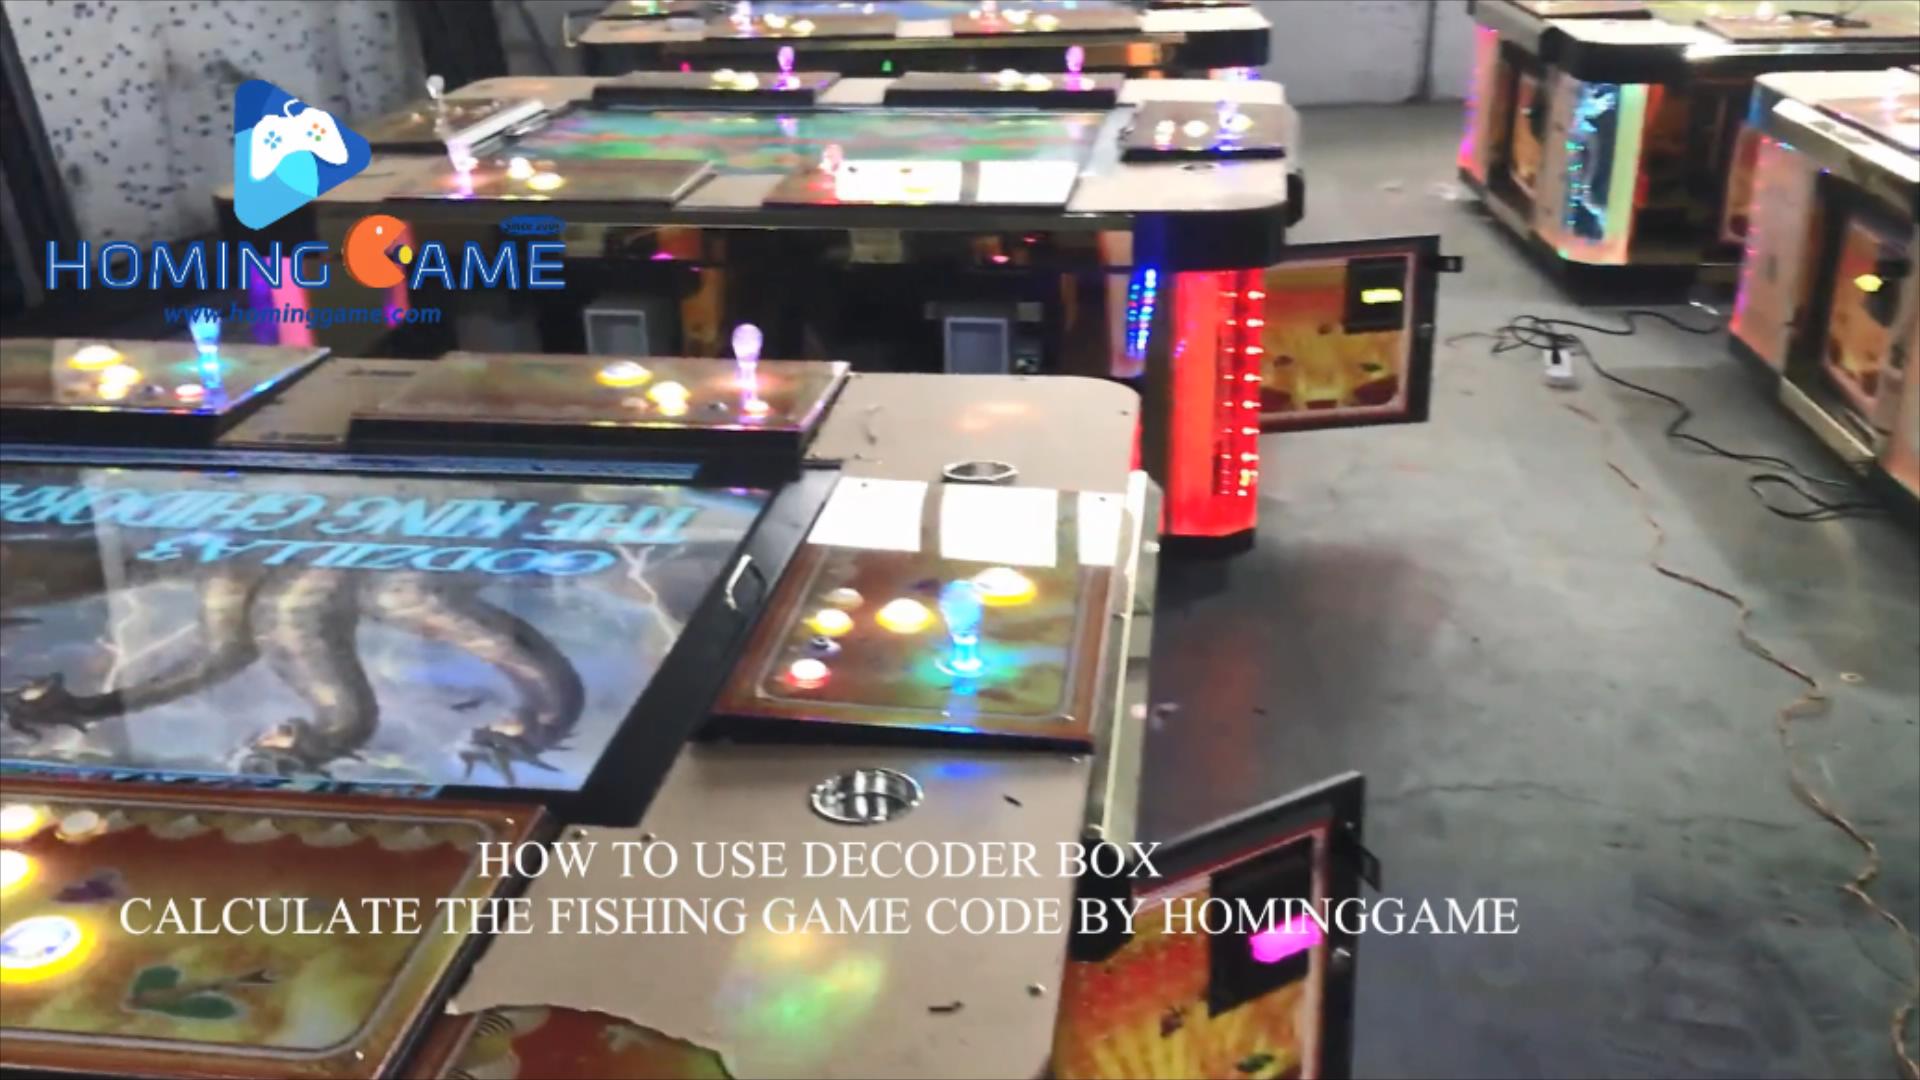 How to use the decoder box to calculate the Godzilla1,2,3,Aliens Vs Termination,Rampage,Dragon Legend,Dragon Slayer,zombie Awaken fishing game code by HomingGame(Order Call Whatsapp:+8618688409495),Fising Game Machine Skills,How to Play the Fishing Table Game Machine by HomingGame(Order call whatsapp:+8618688409495),fishing game,fishing table,fishing table game machine,fishing game machine,fishing arcade game machine,fish hunter fishing game machine,upright table fishing game machine,standup fishing game machine,ocean king 3 fishing game machine,capatian america fishing game machine,tiger stirke fishing game machine,godzilla fishing game machine,rampage fishing game machine,dragon legend fishing game machine,ocean king,igs fishing game machine,electrical fishing game machine,usa fishing game machine,ocean king 2 fishing gam emachine,fishing game machine supplier,fishing game machine manufacturer,gaming machine,gambling machine,game machine,arcade game machine,coin operated game machine,indoor game machine,electrical game machine,amusement park game equipment,amusement machine,gaming,casino gaming machine,usa fishing game machine supplier,USA fishing table game machine manufacturer,fishing game cheats,fishing game skills,how to paly the fishing game machine,fishing game decoding,fishing game decoder box,hominggame,www.gametube.hk,hominggame fishing game,entertainment game machine,family entertainment game machine,arcade game machine for sale